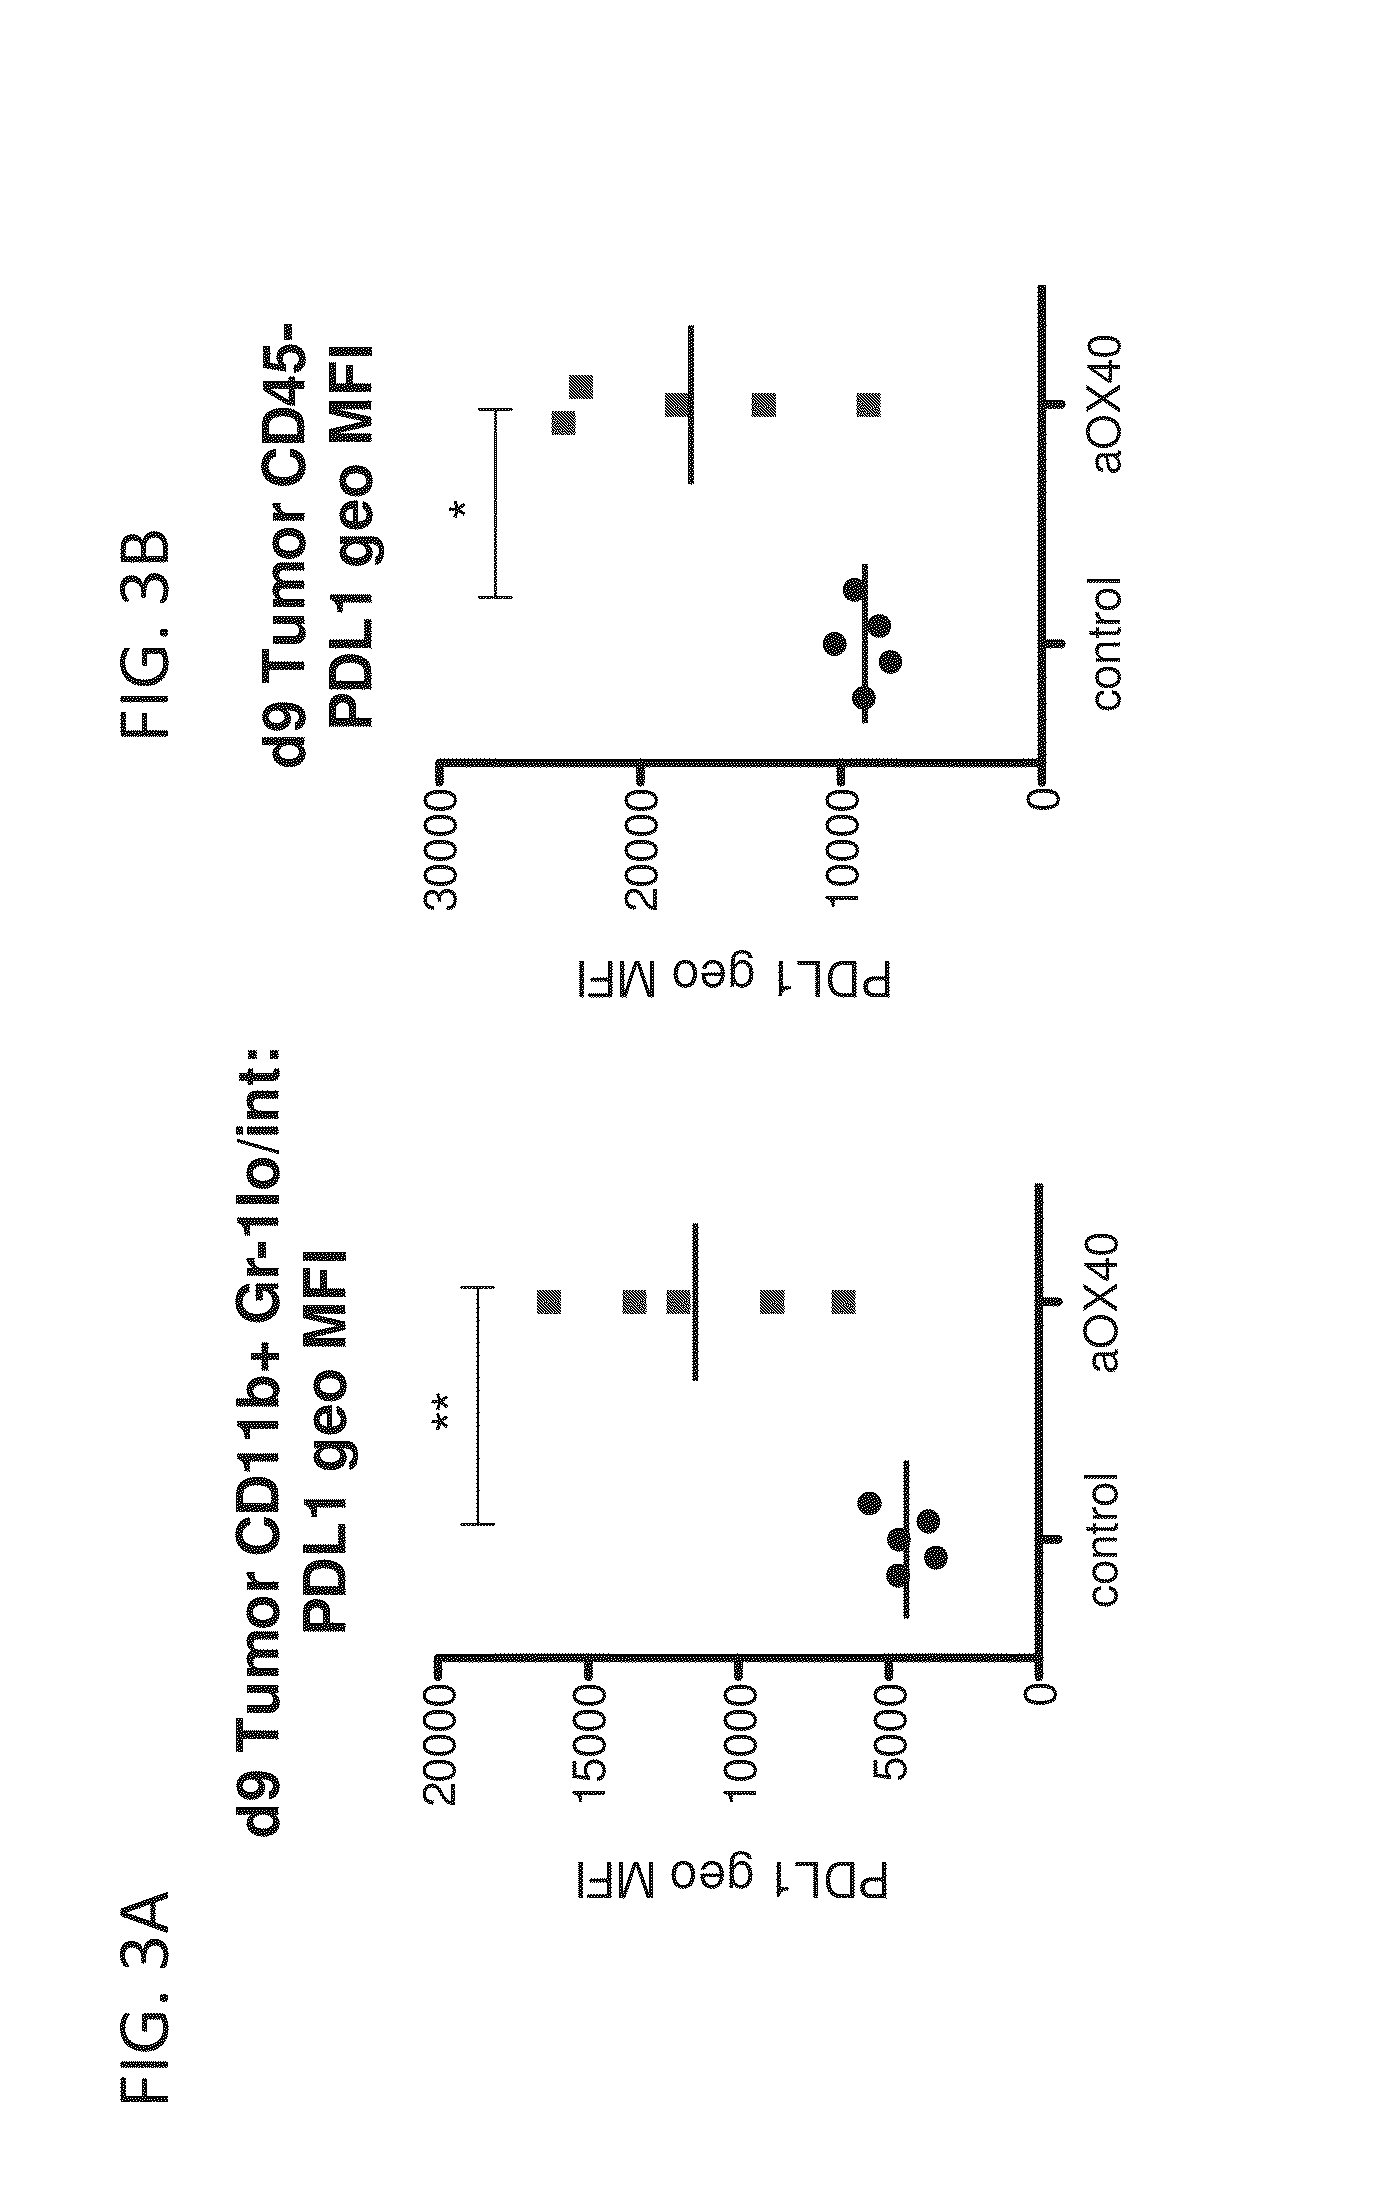 Combination therapy comprising ox40 binding agonists and pd-1 axis binding antagonists